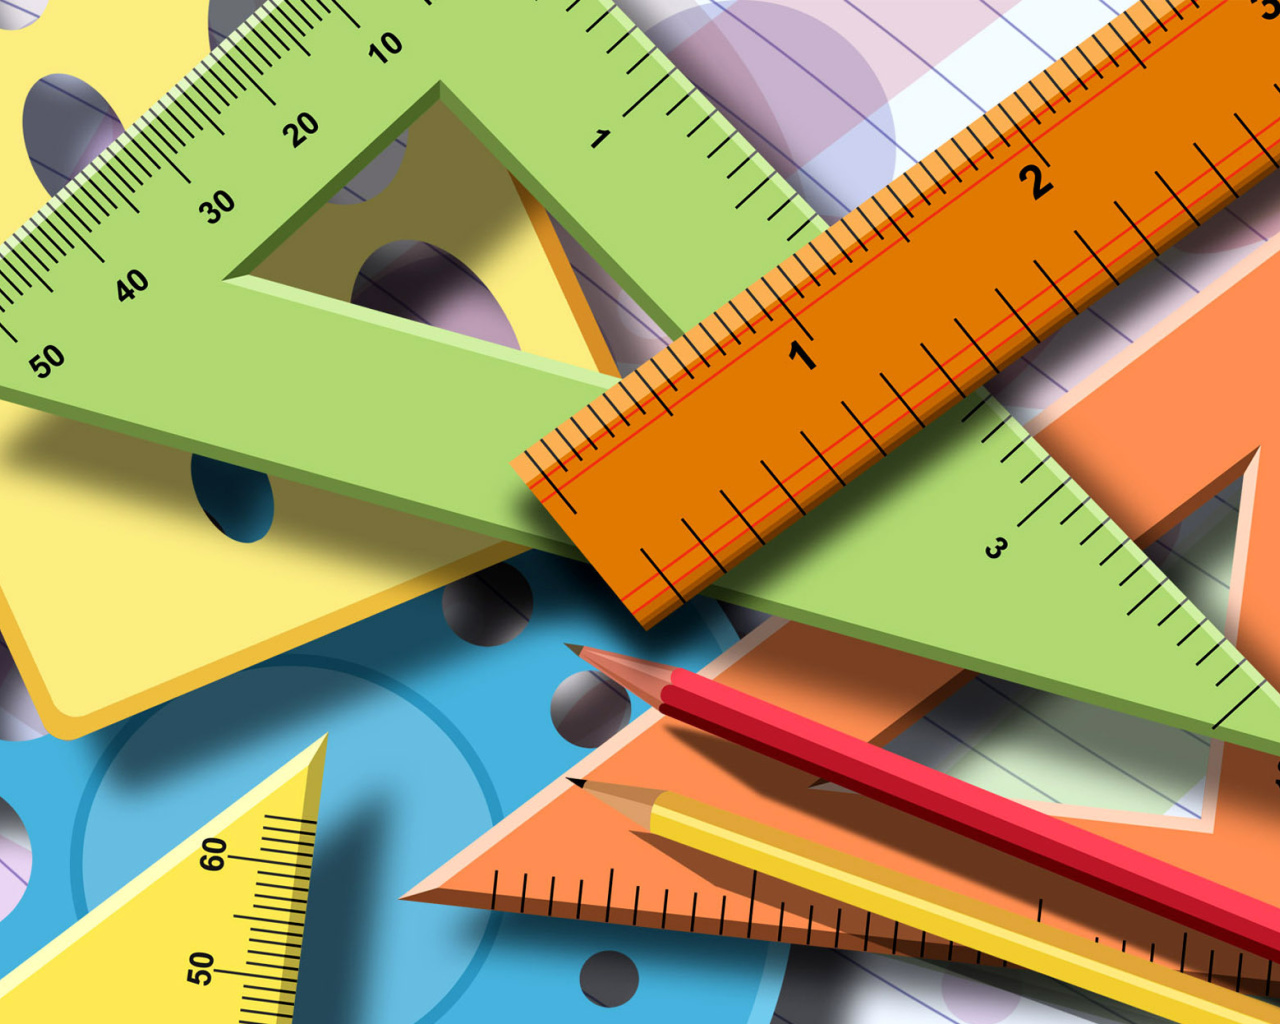 Geometry Instruments for Science Research wallpaper 1280x1024